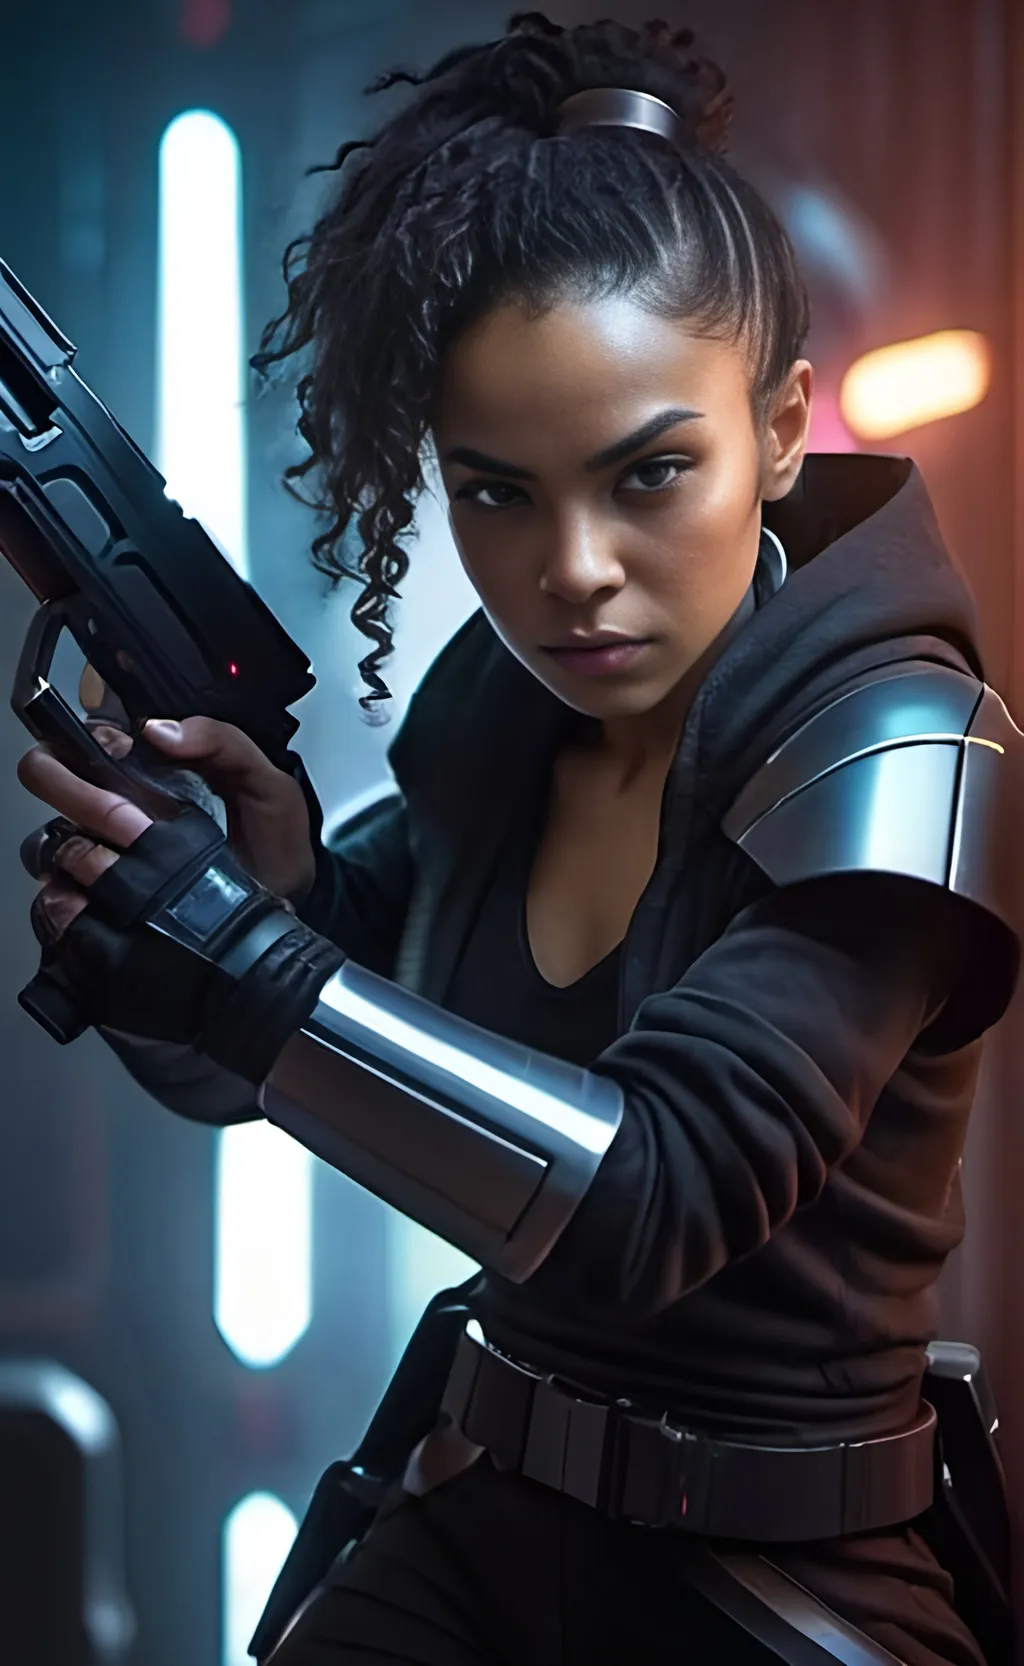 Prompt: Mixed-race dark-Jedi wielding blaster, sci-fi, action-packed, intense lighting, highres, detailed outfit and blaster, futuristic setting, dramatic pose, cool tones, cyberpunk, futuristic